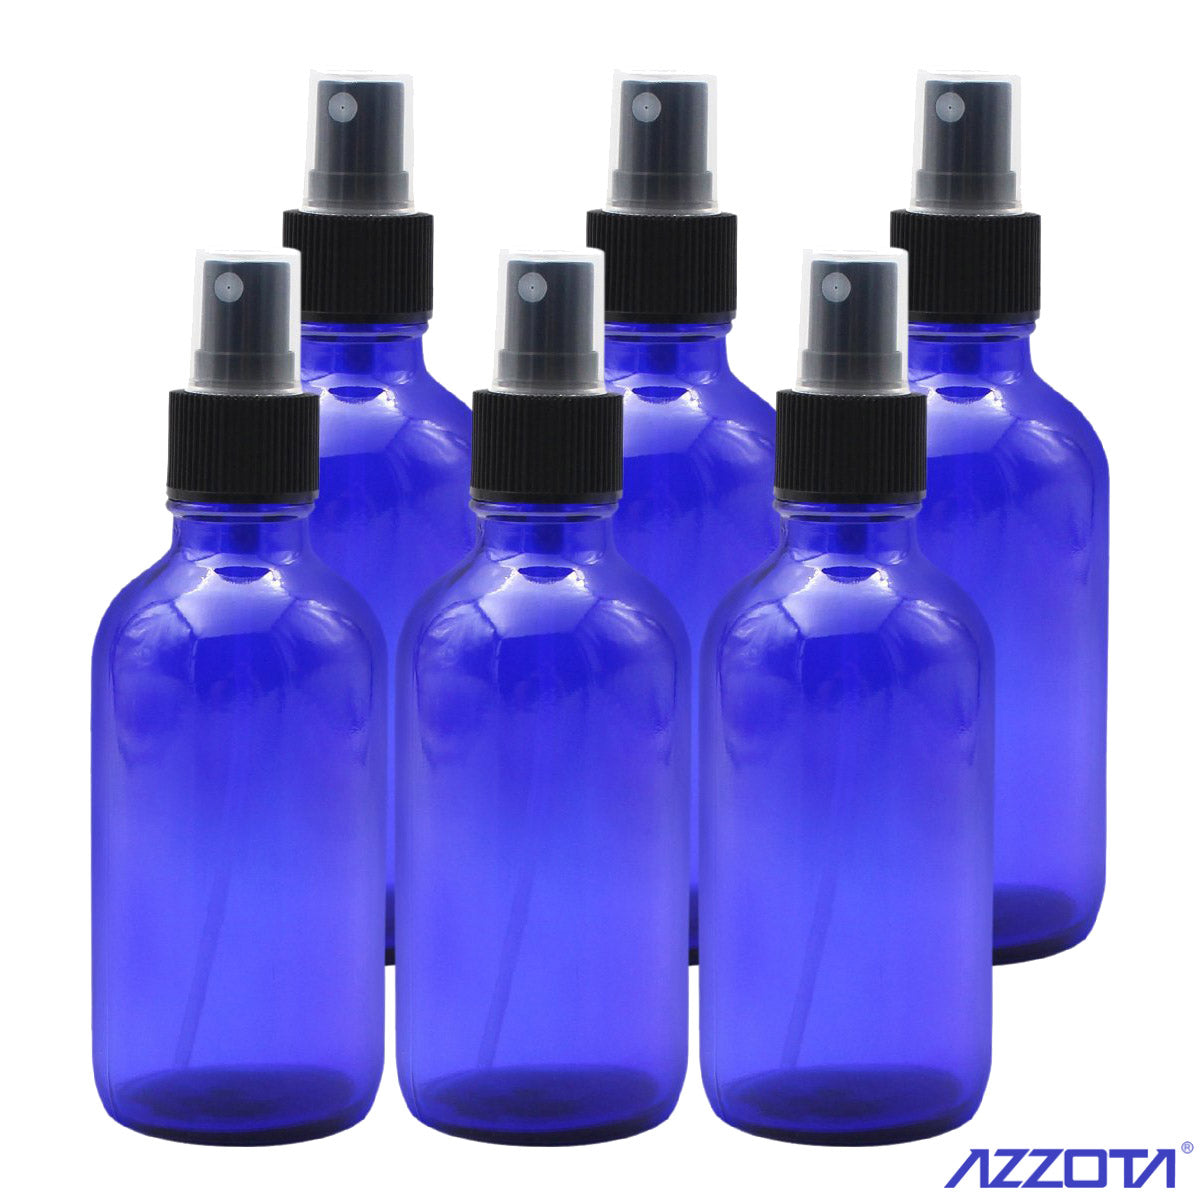 Blue Glass Bottles with Fine Mist Sprayers, 30ml/1oz for oils or liquid requiring a dropper